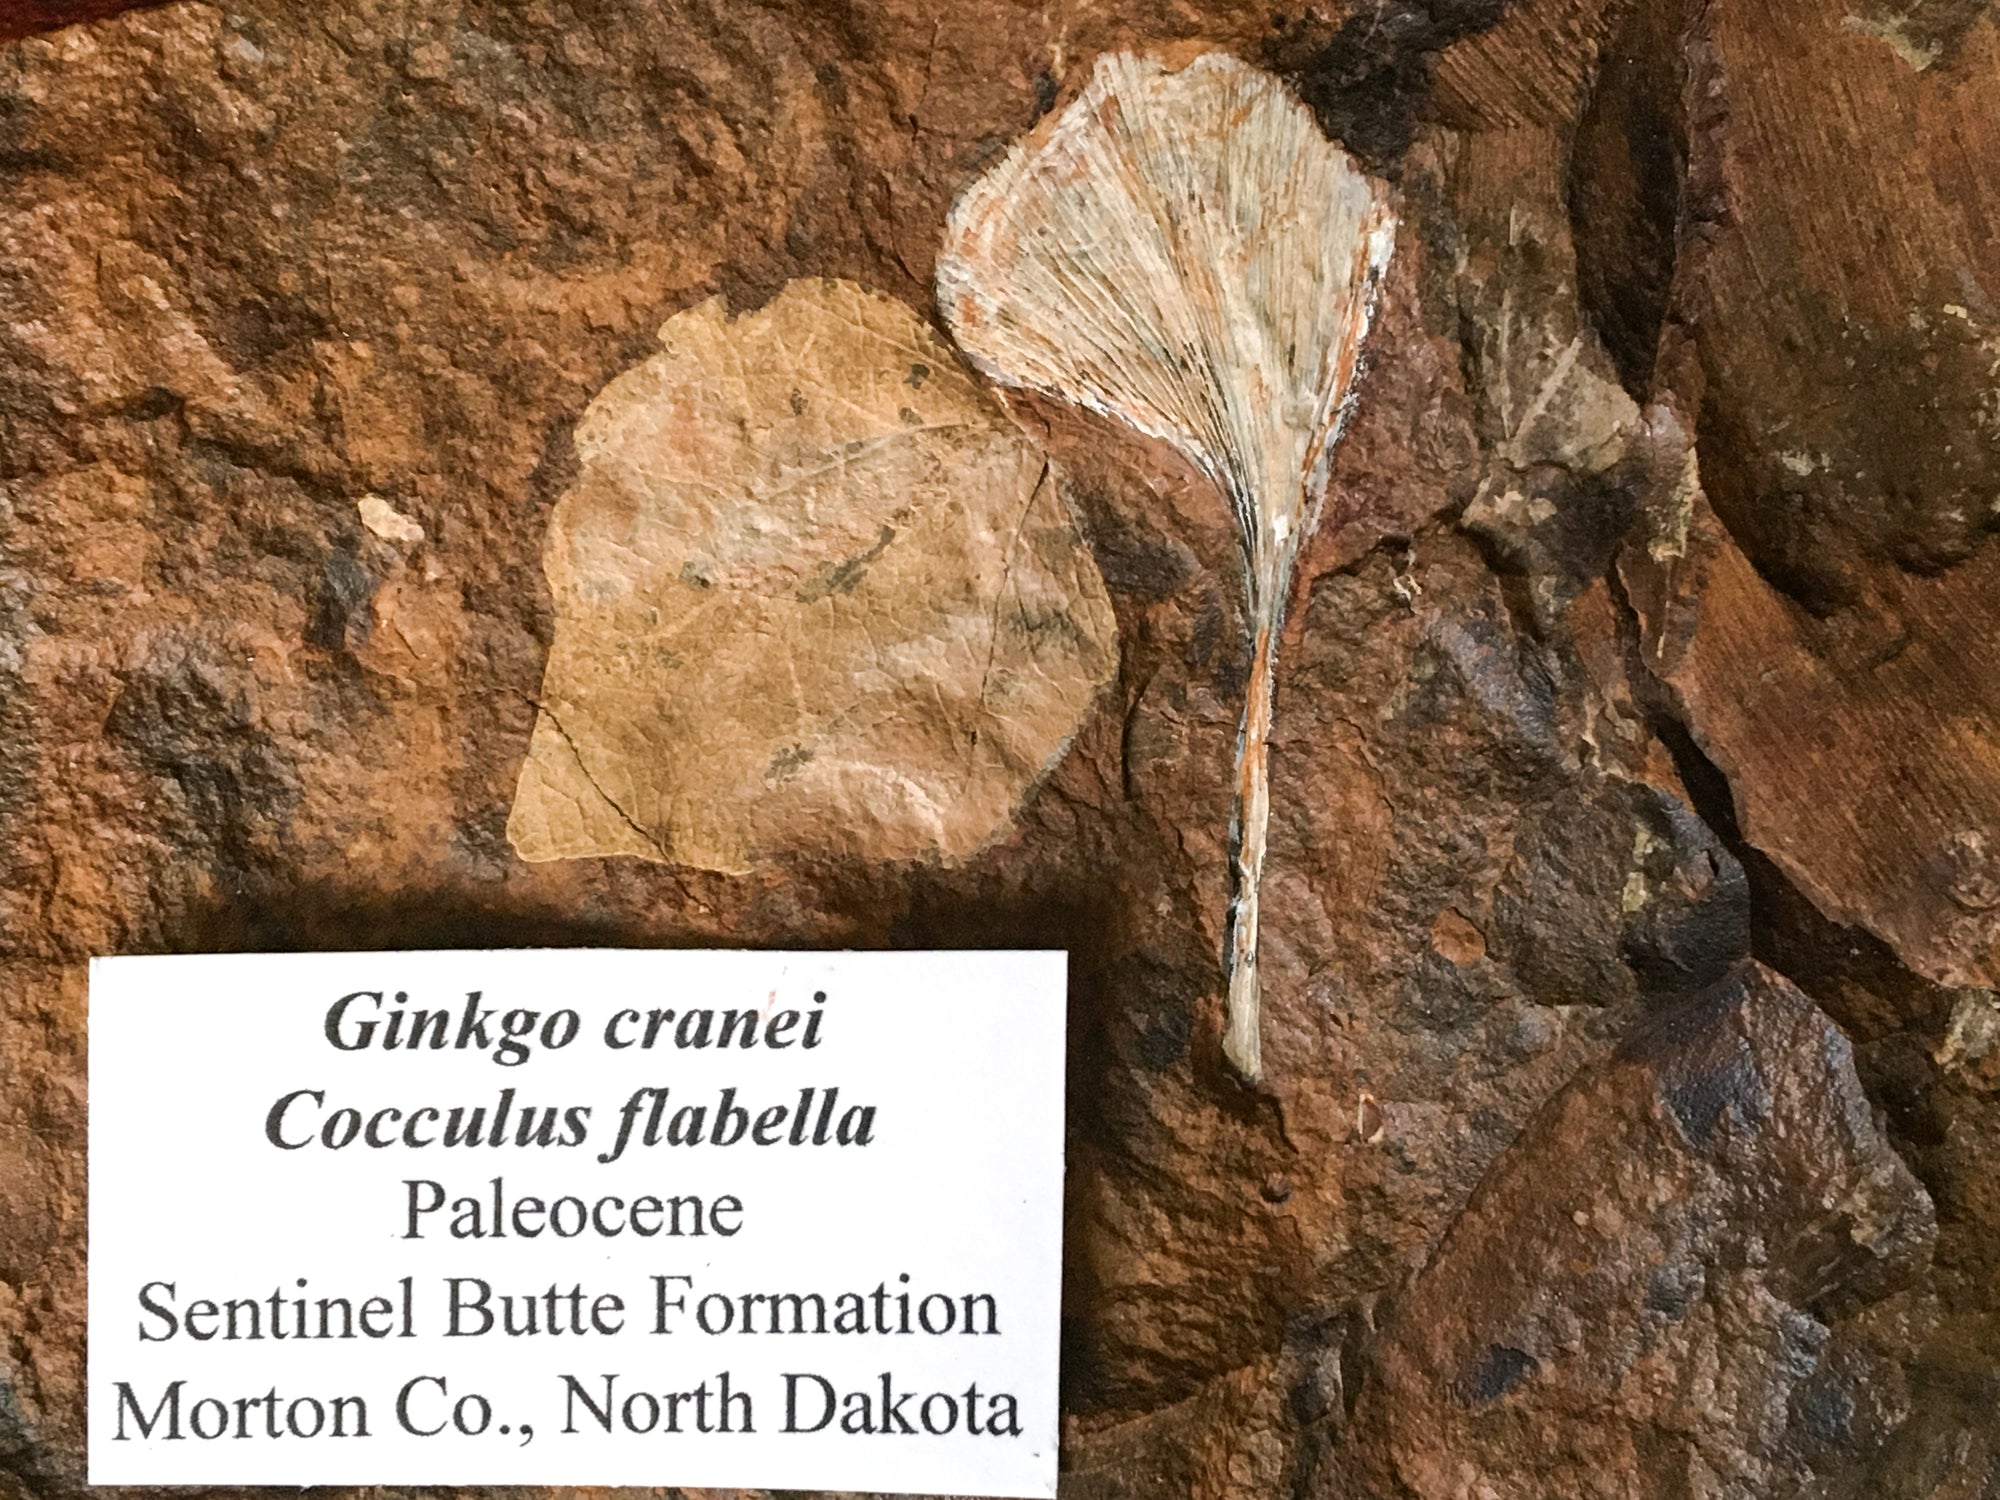 Gingko and cocculus fossils in brown mudstone. The sample has a printed label attached to it. The label says "gingko cranei, Cocculus flabella, paleocene, sentinel butte formation, Morton co. North Dakota 